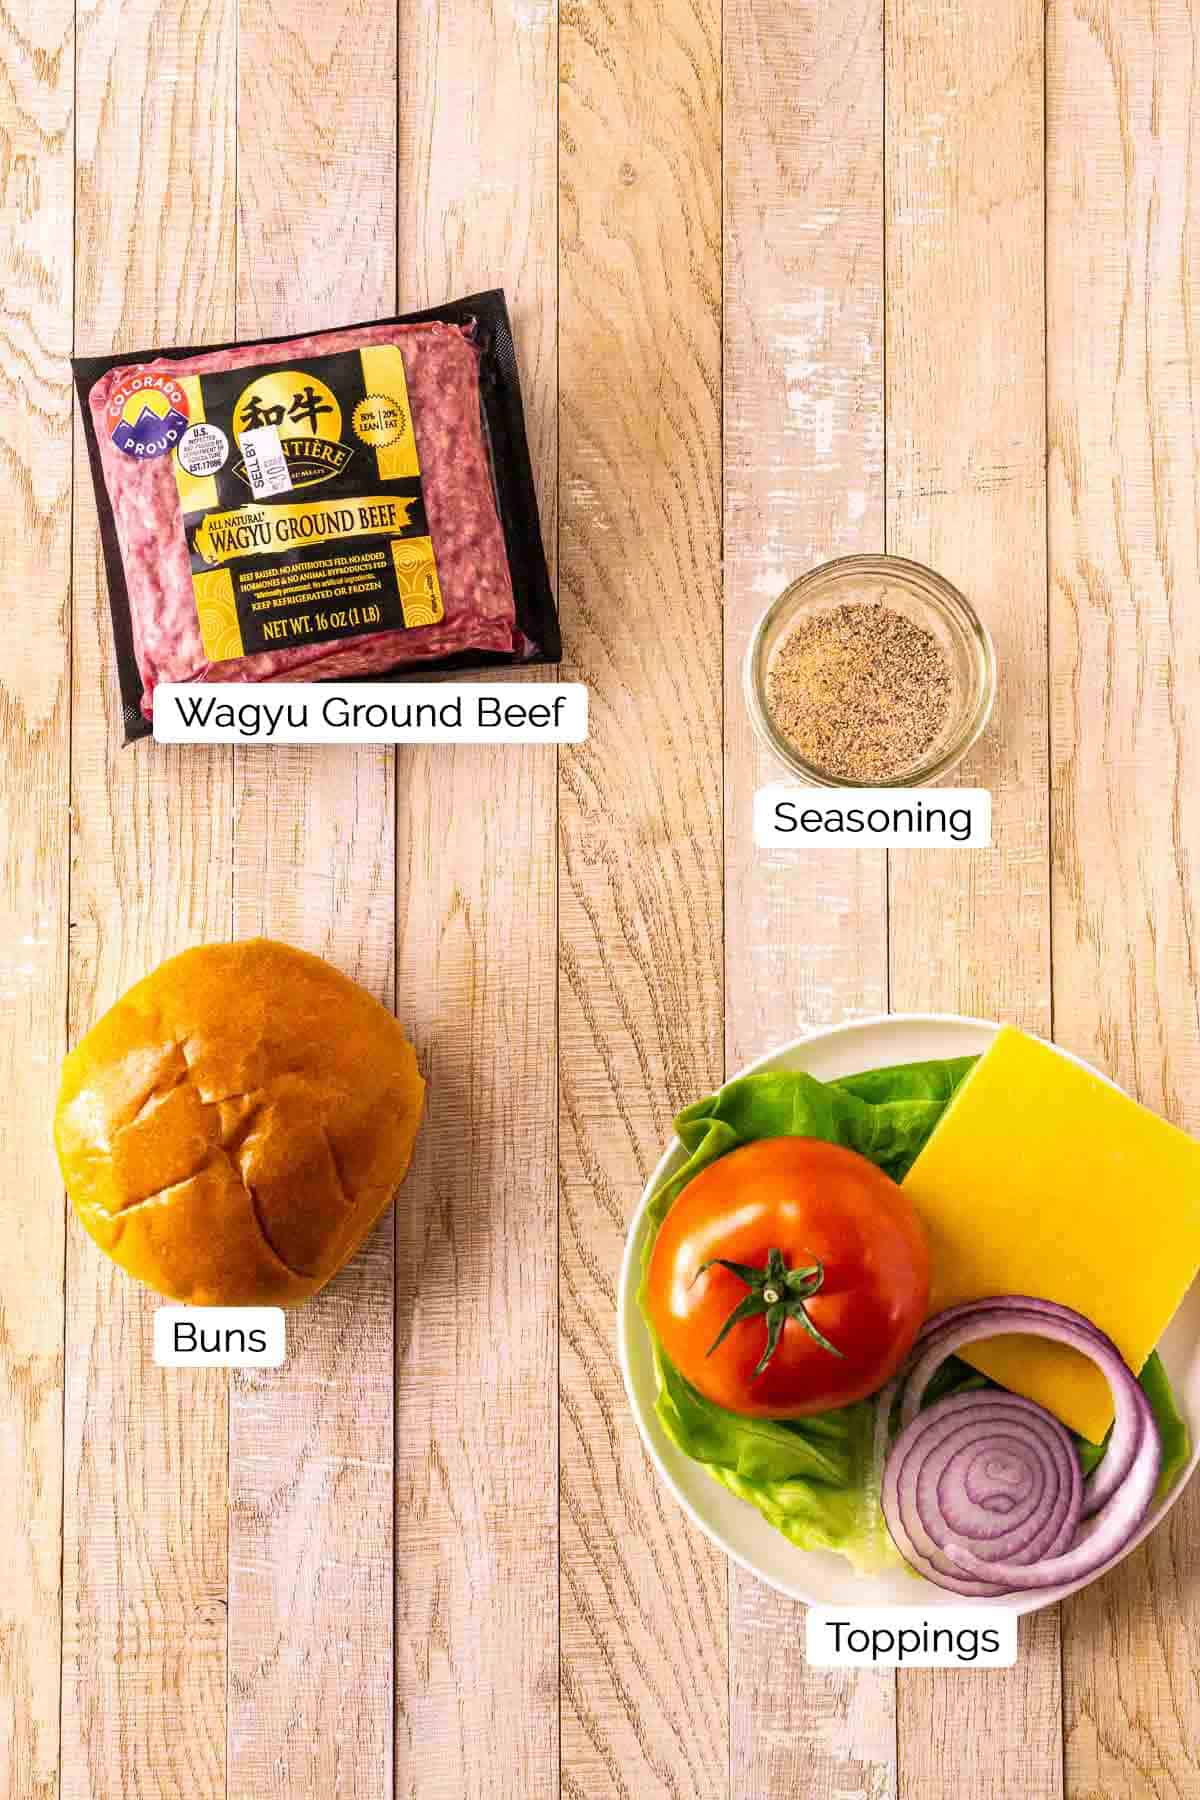 The burger ingredients on a cream-colored wooden surface with black and white labels underneath the items.